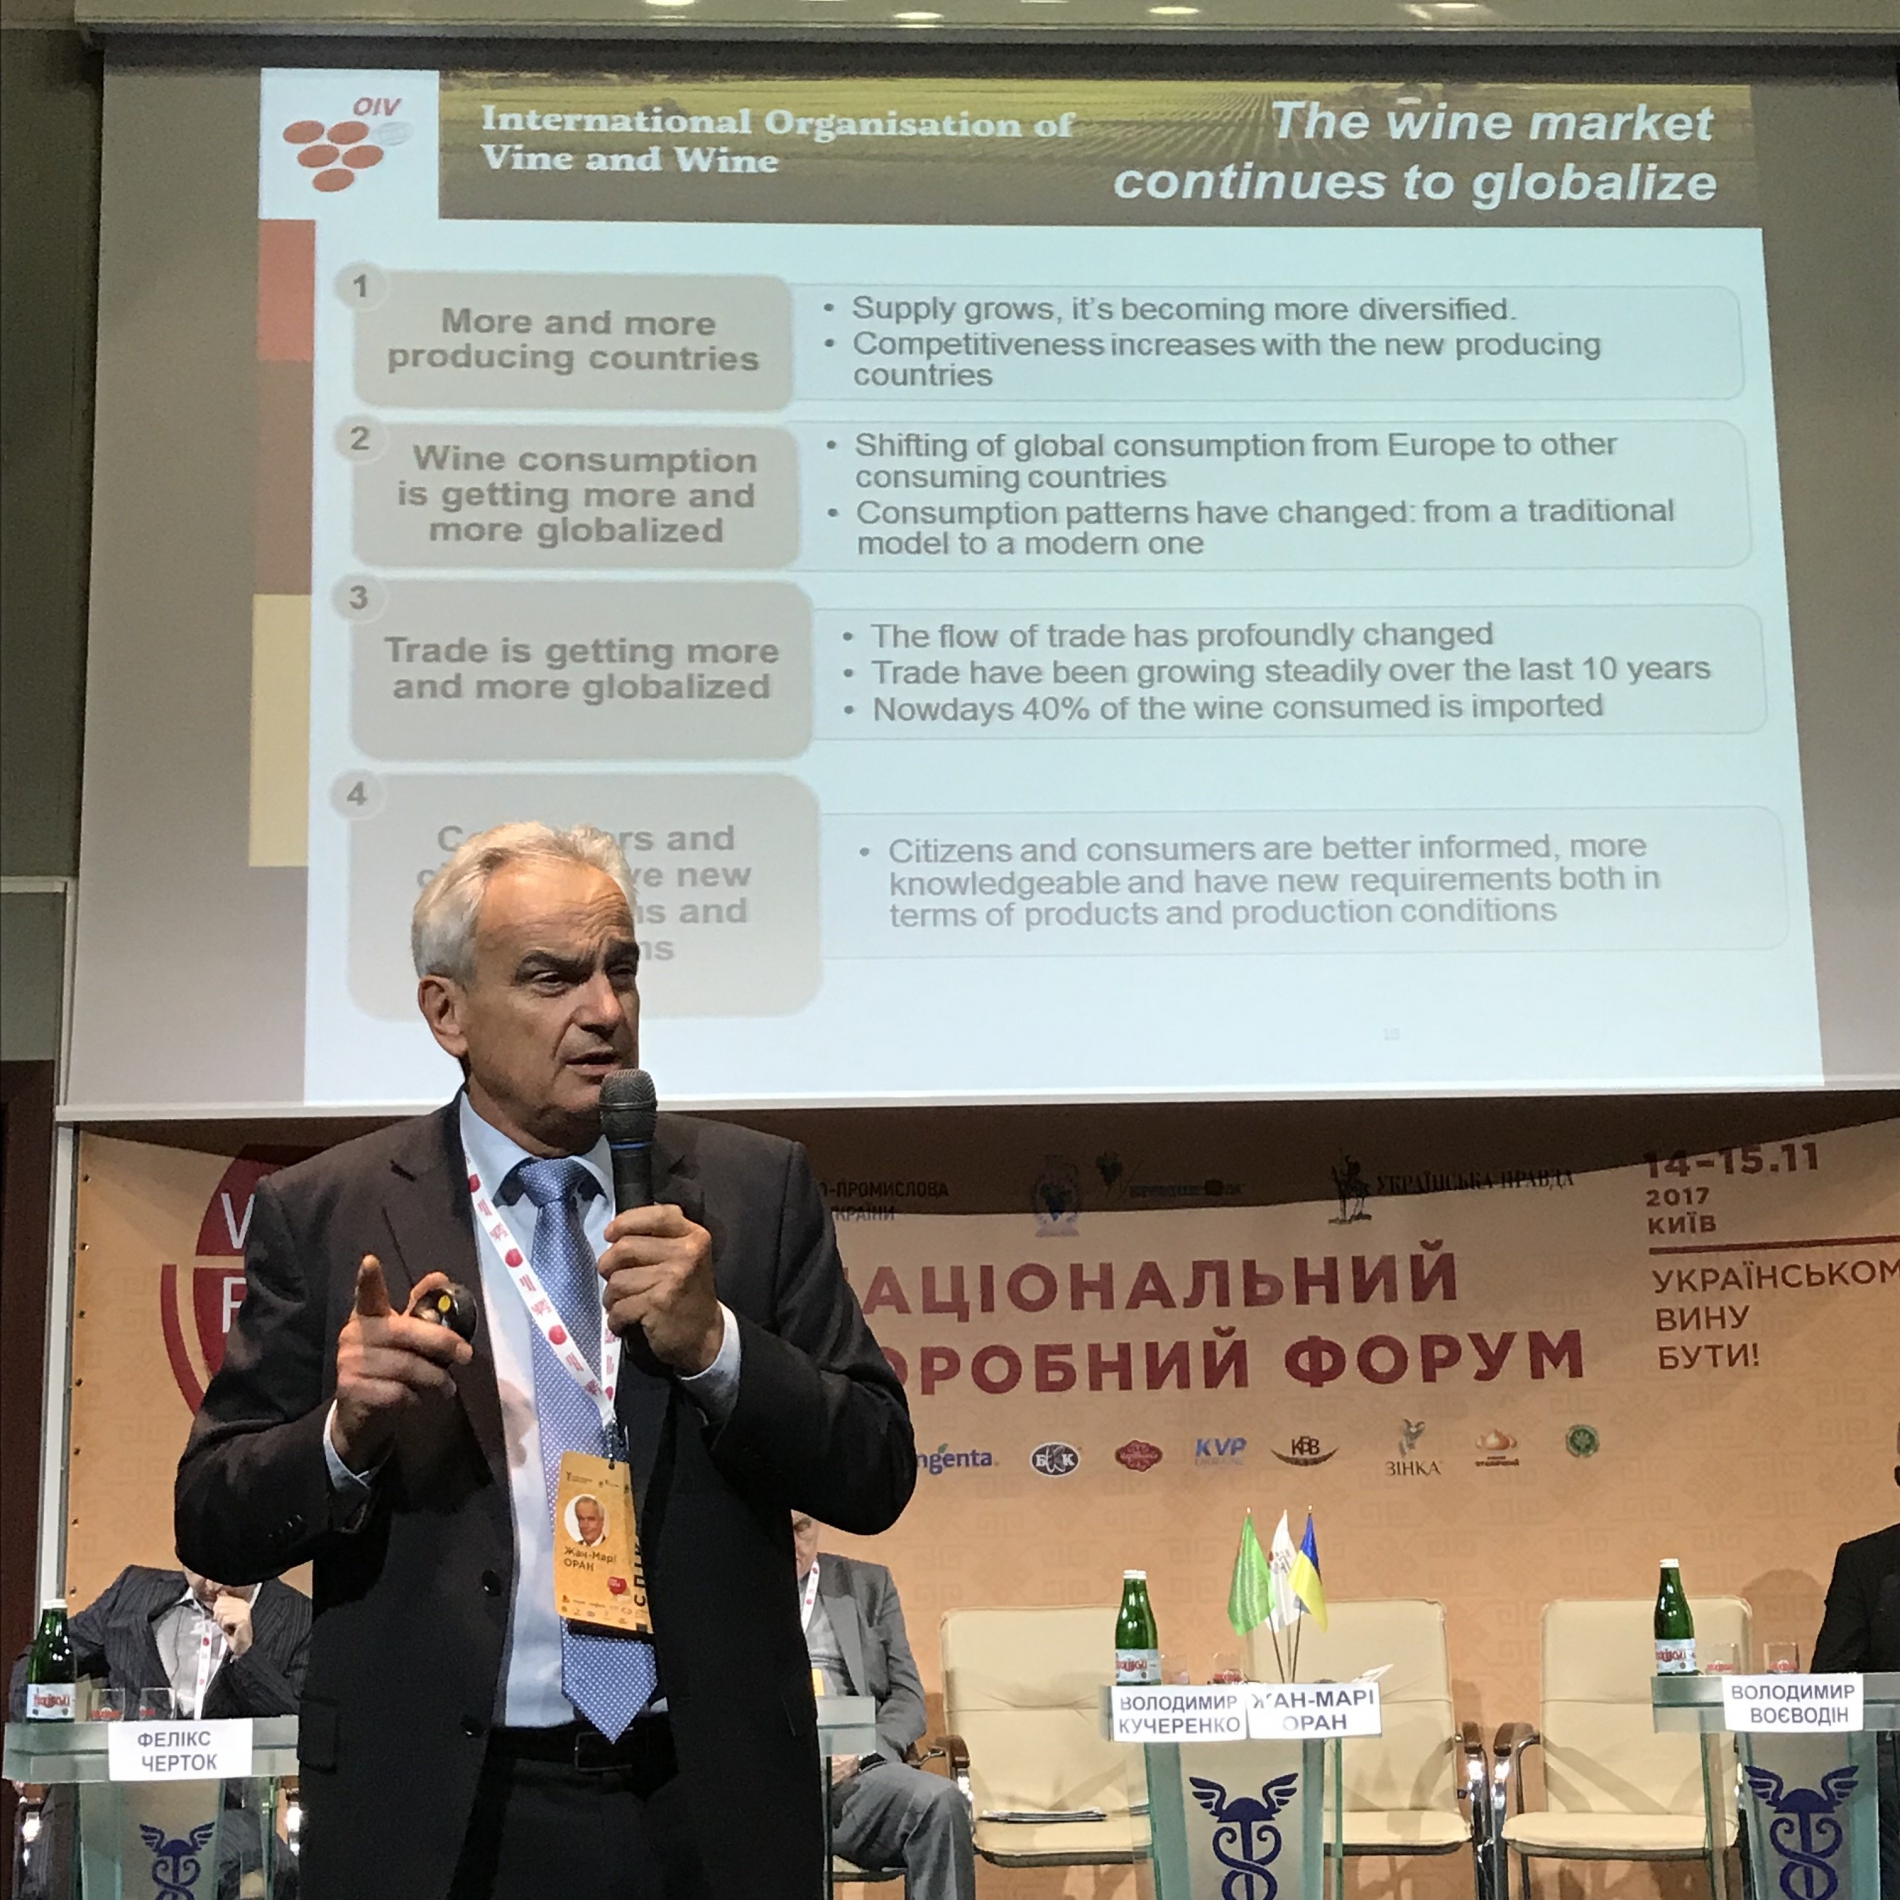 The Director General of the OIV takes part in the 3rd Ukrainian National Wine Forum